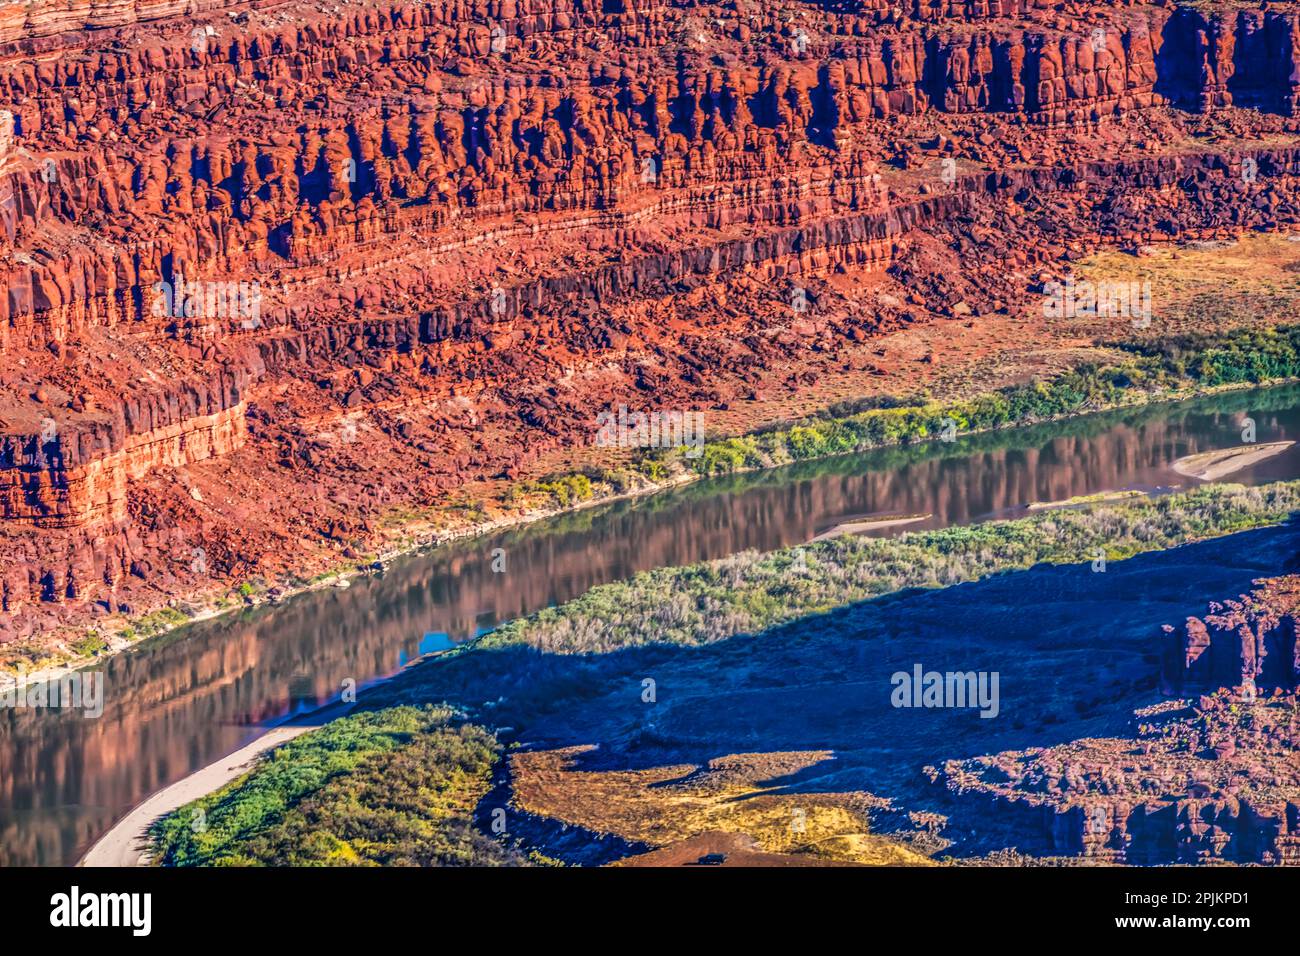 Green River, Grand View Point Overlook, Red Rock Canyons, Canyonlands National Park, Moab, Utah. Stock Photo